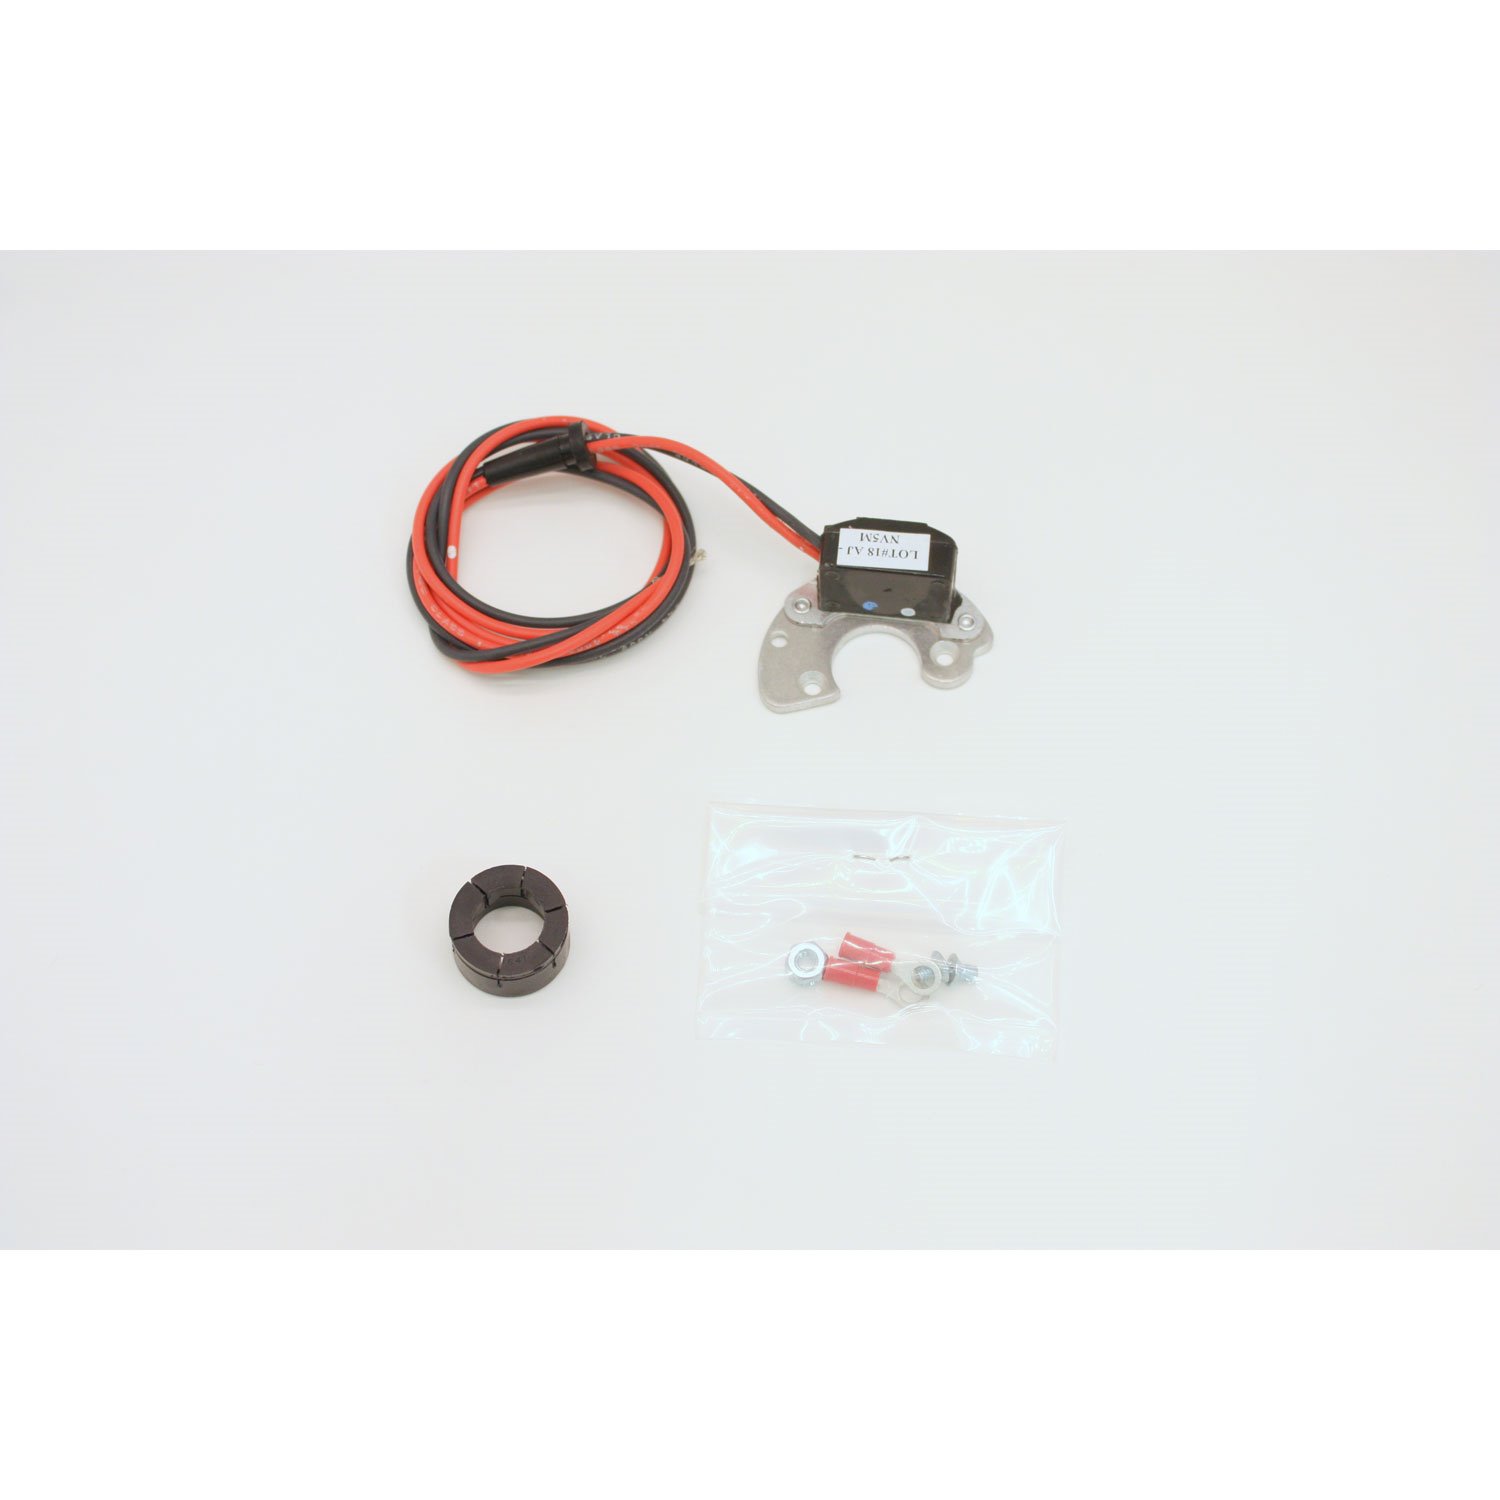 PERTRONIX KIT TOYOTA 4CYL Carb Approved D-57-22